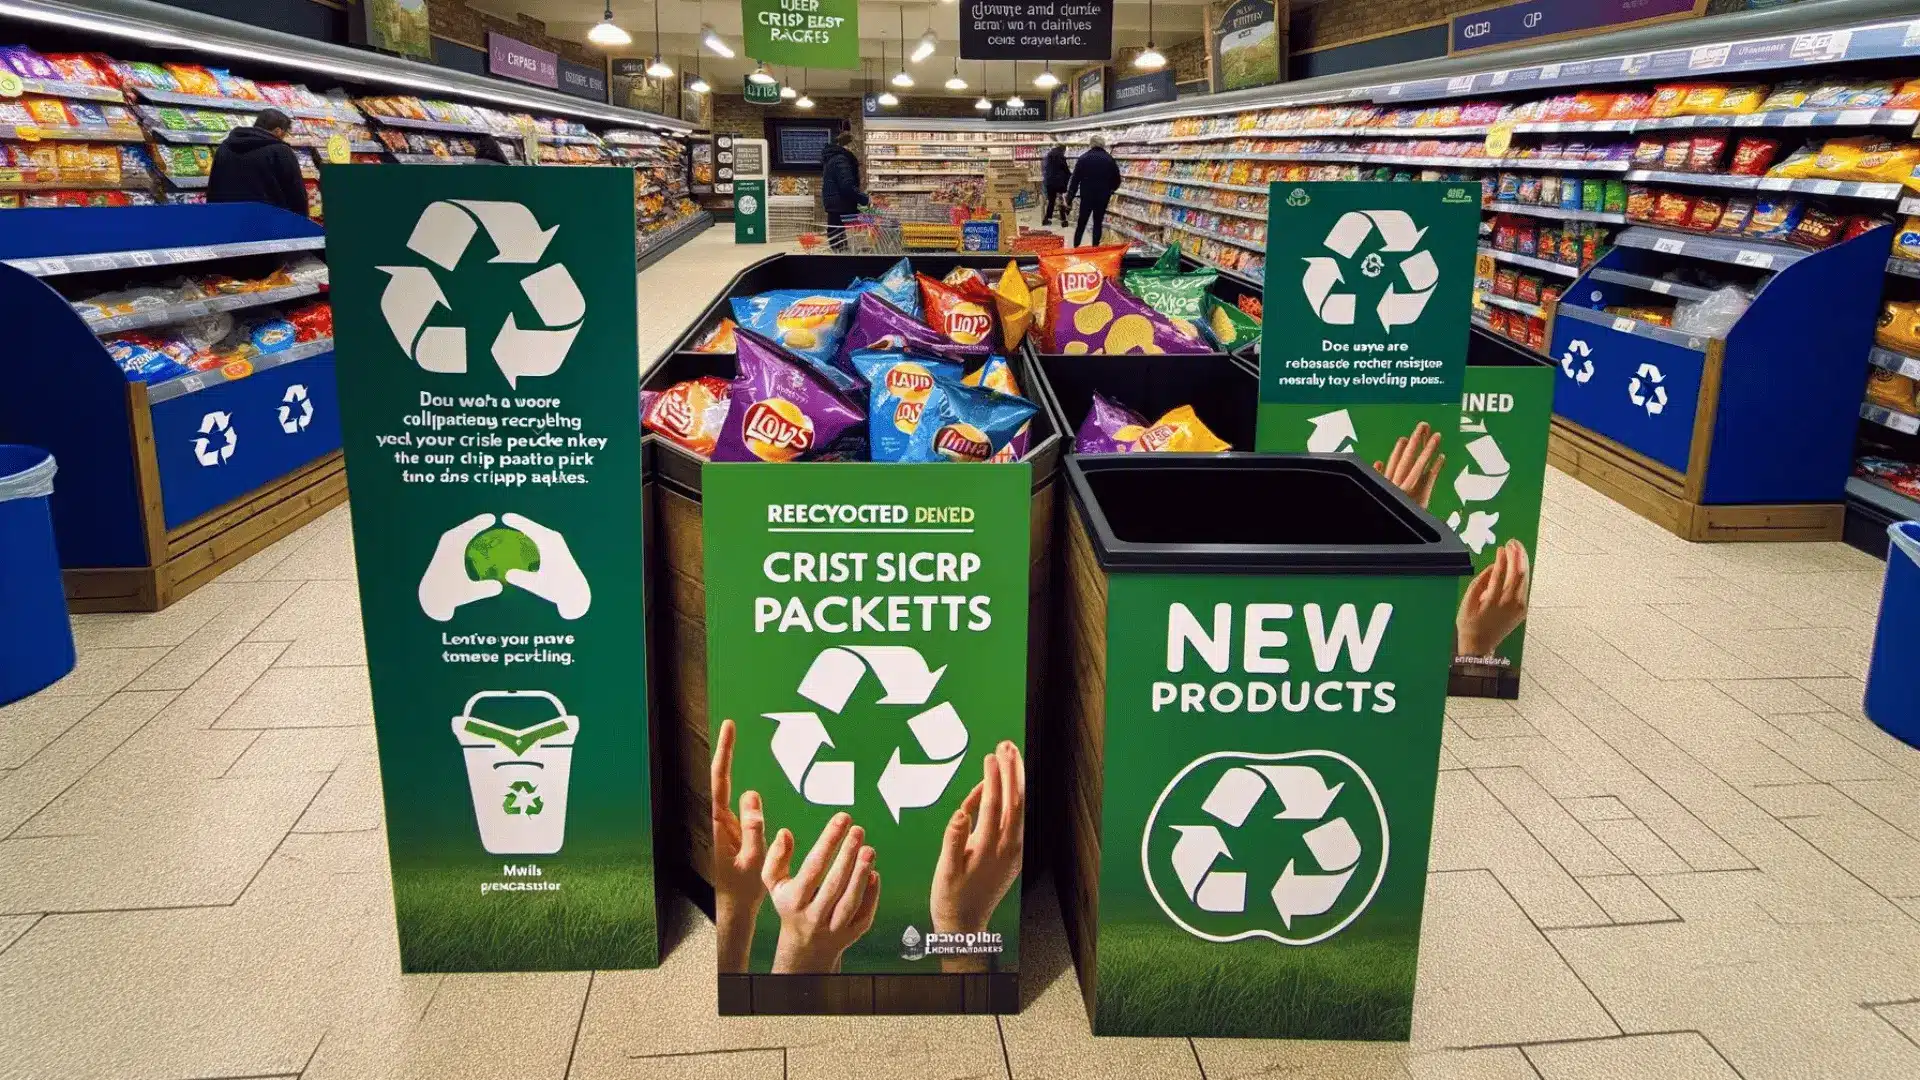 Recycling station for crisp packets in a store, promoting upcycling and waste reduction.